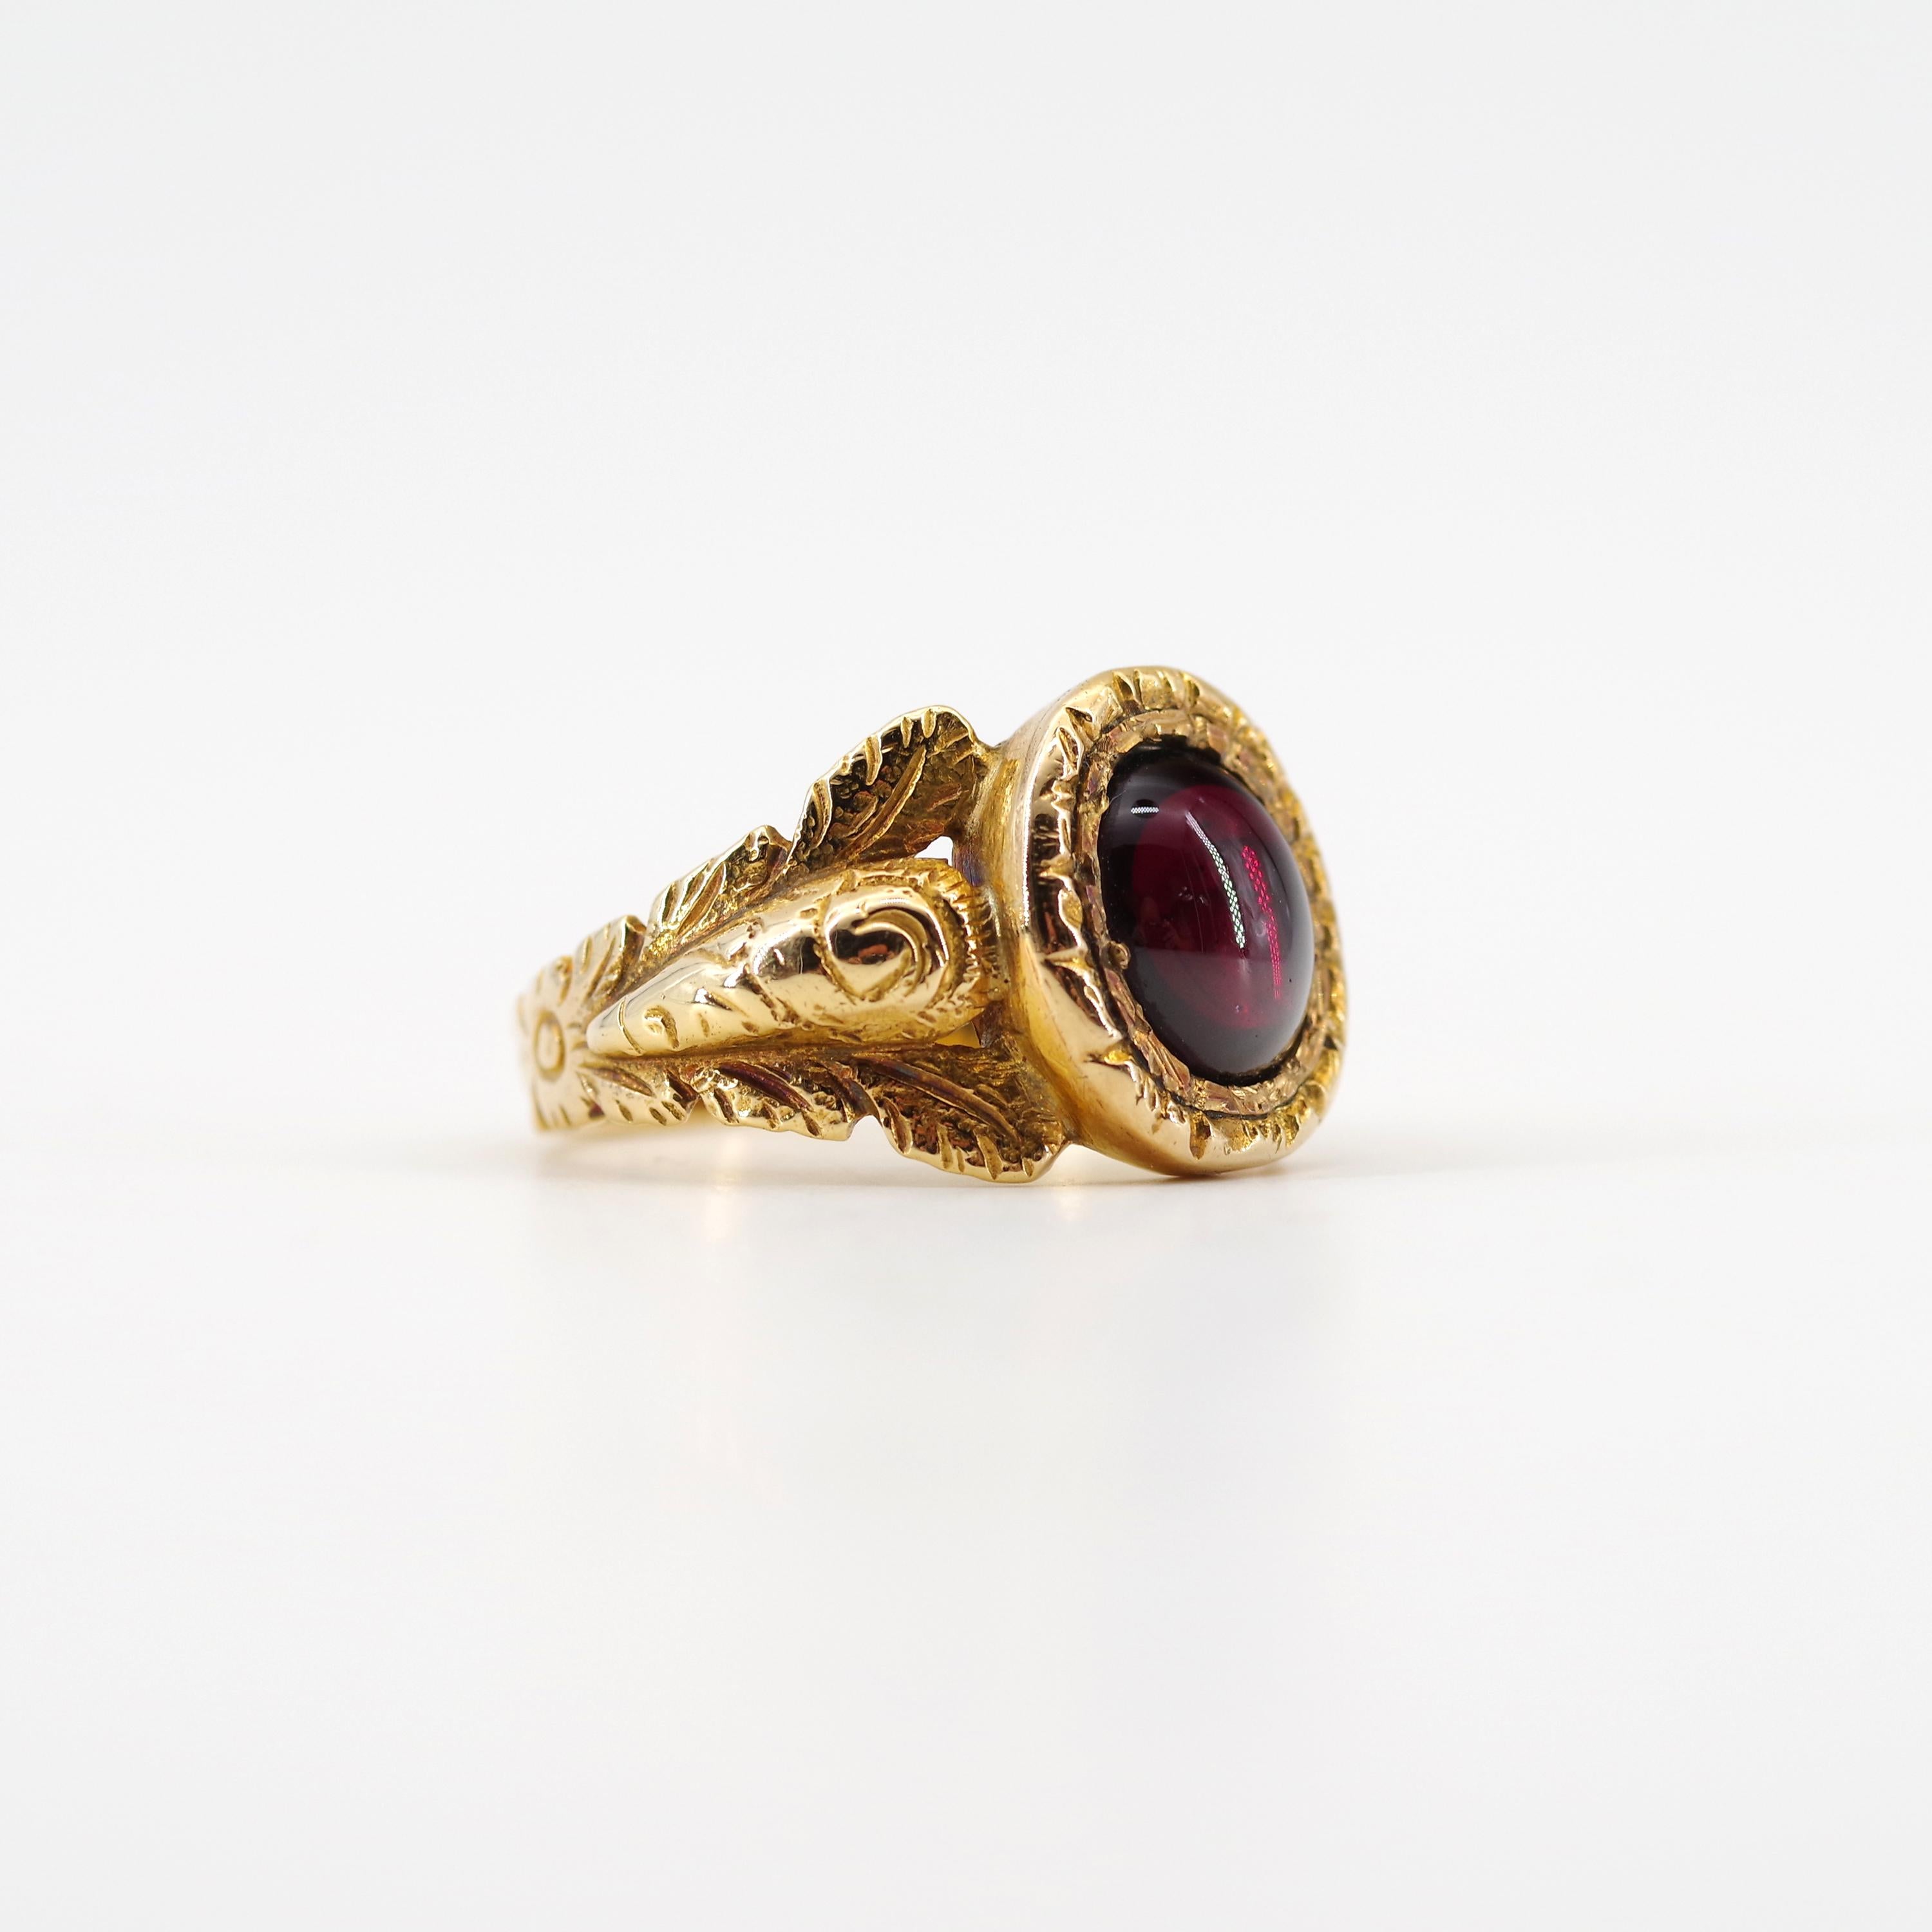 Women's or Men's Men's Georgian Garnet Ring from France with Deeply Carved and Engraved Shoulders